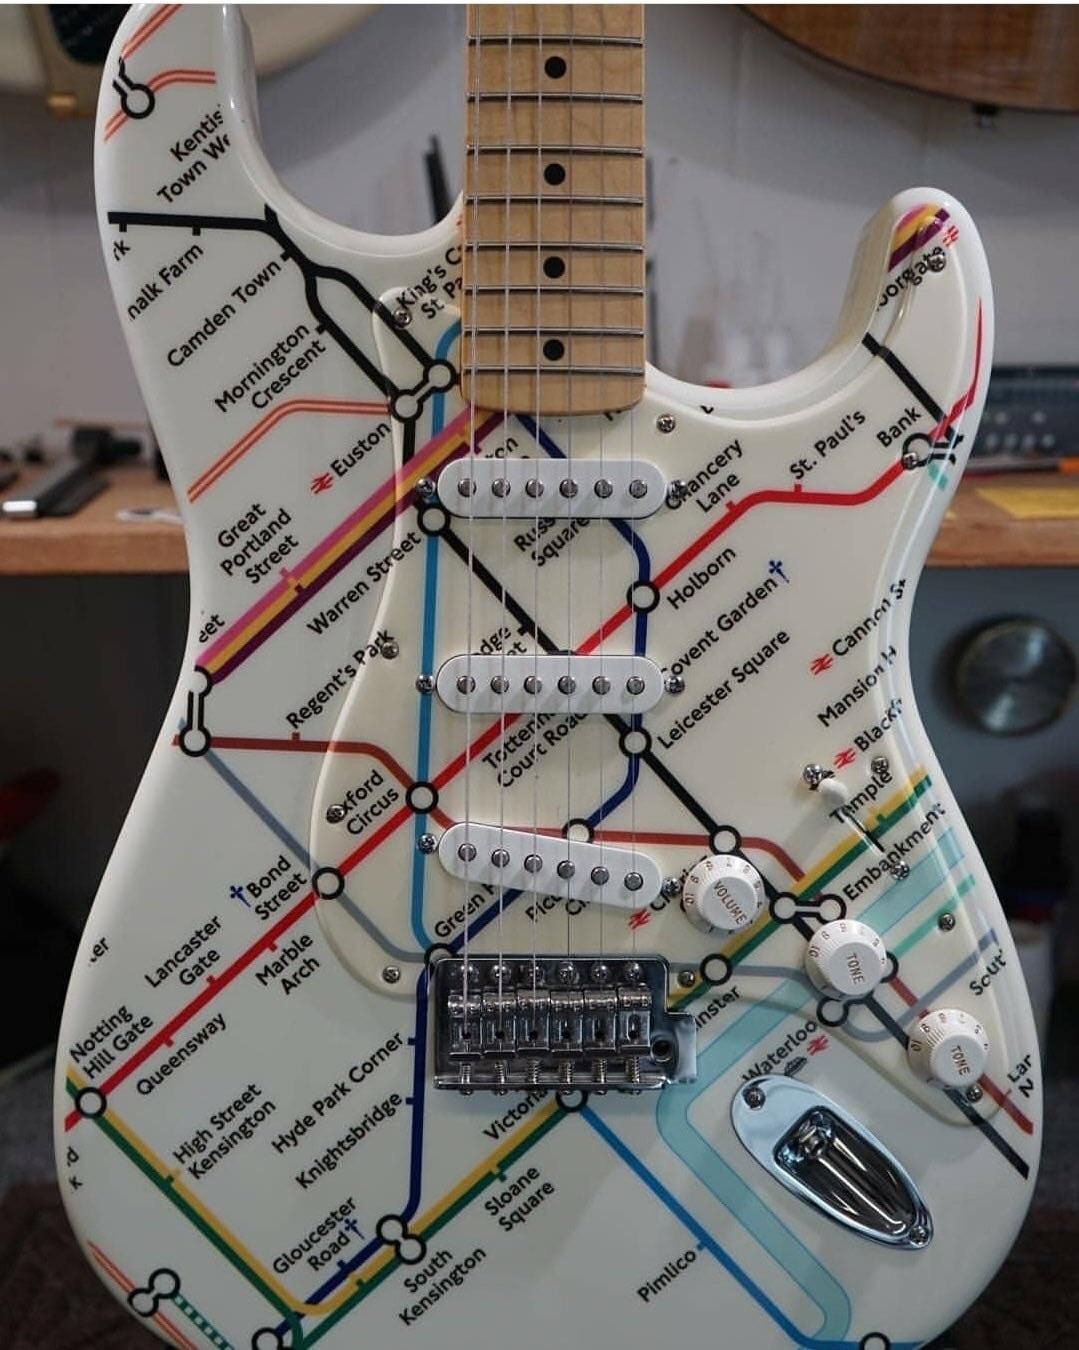 This guitar comes with a built in delay!